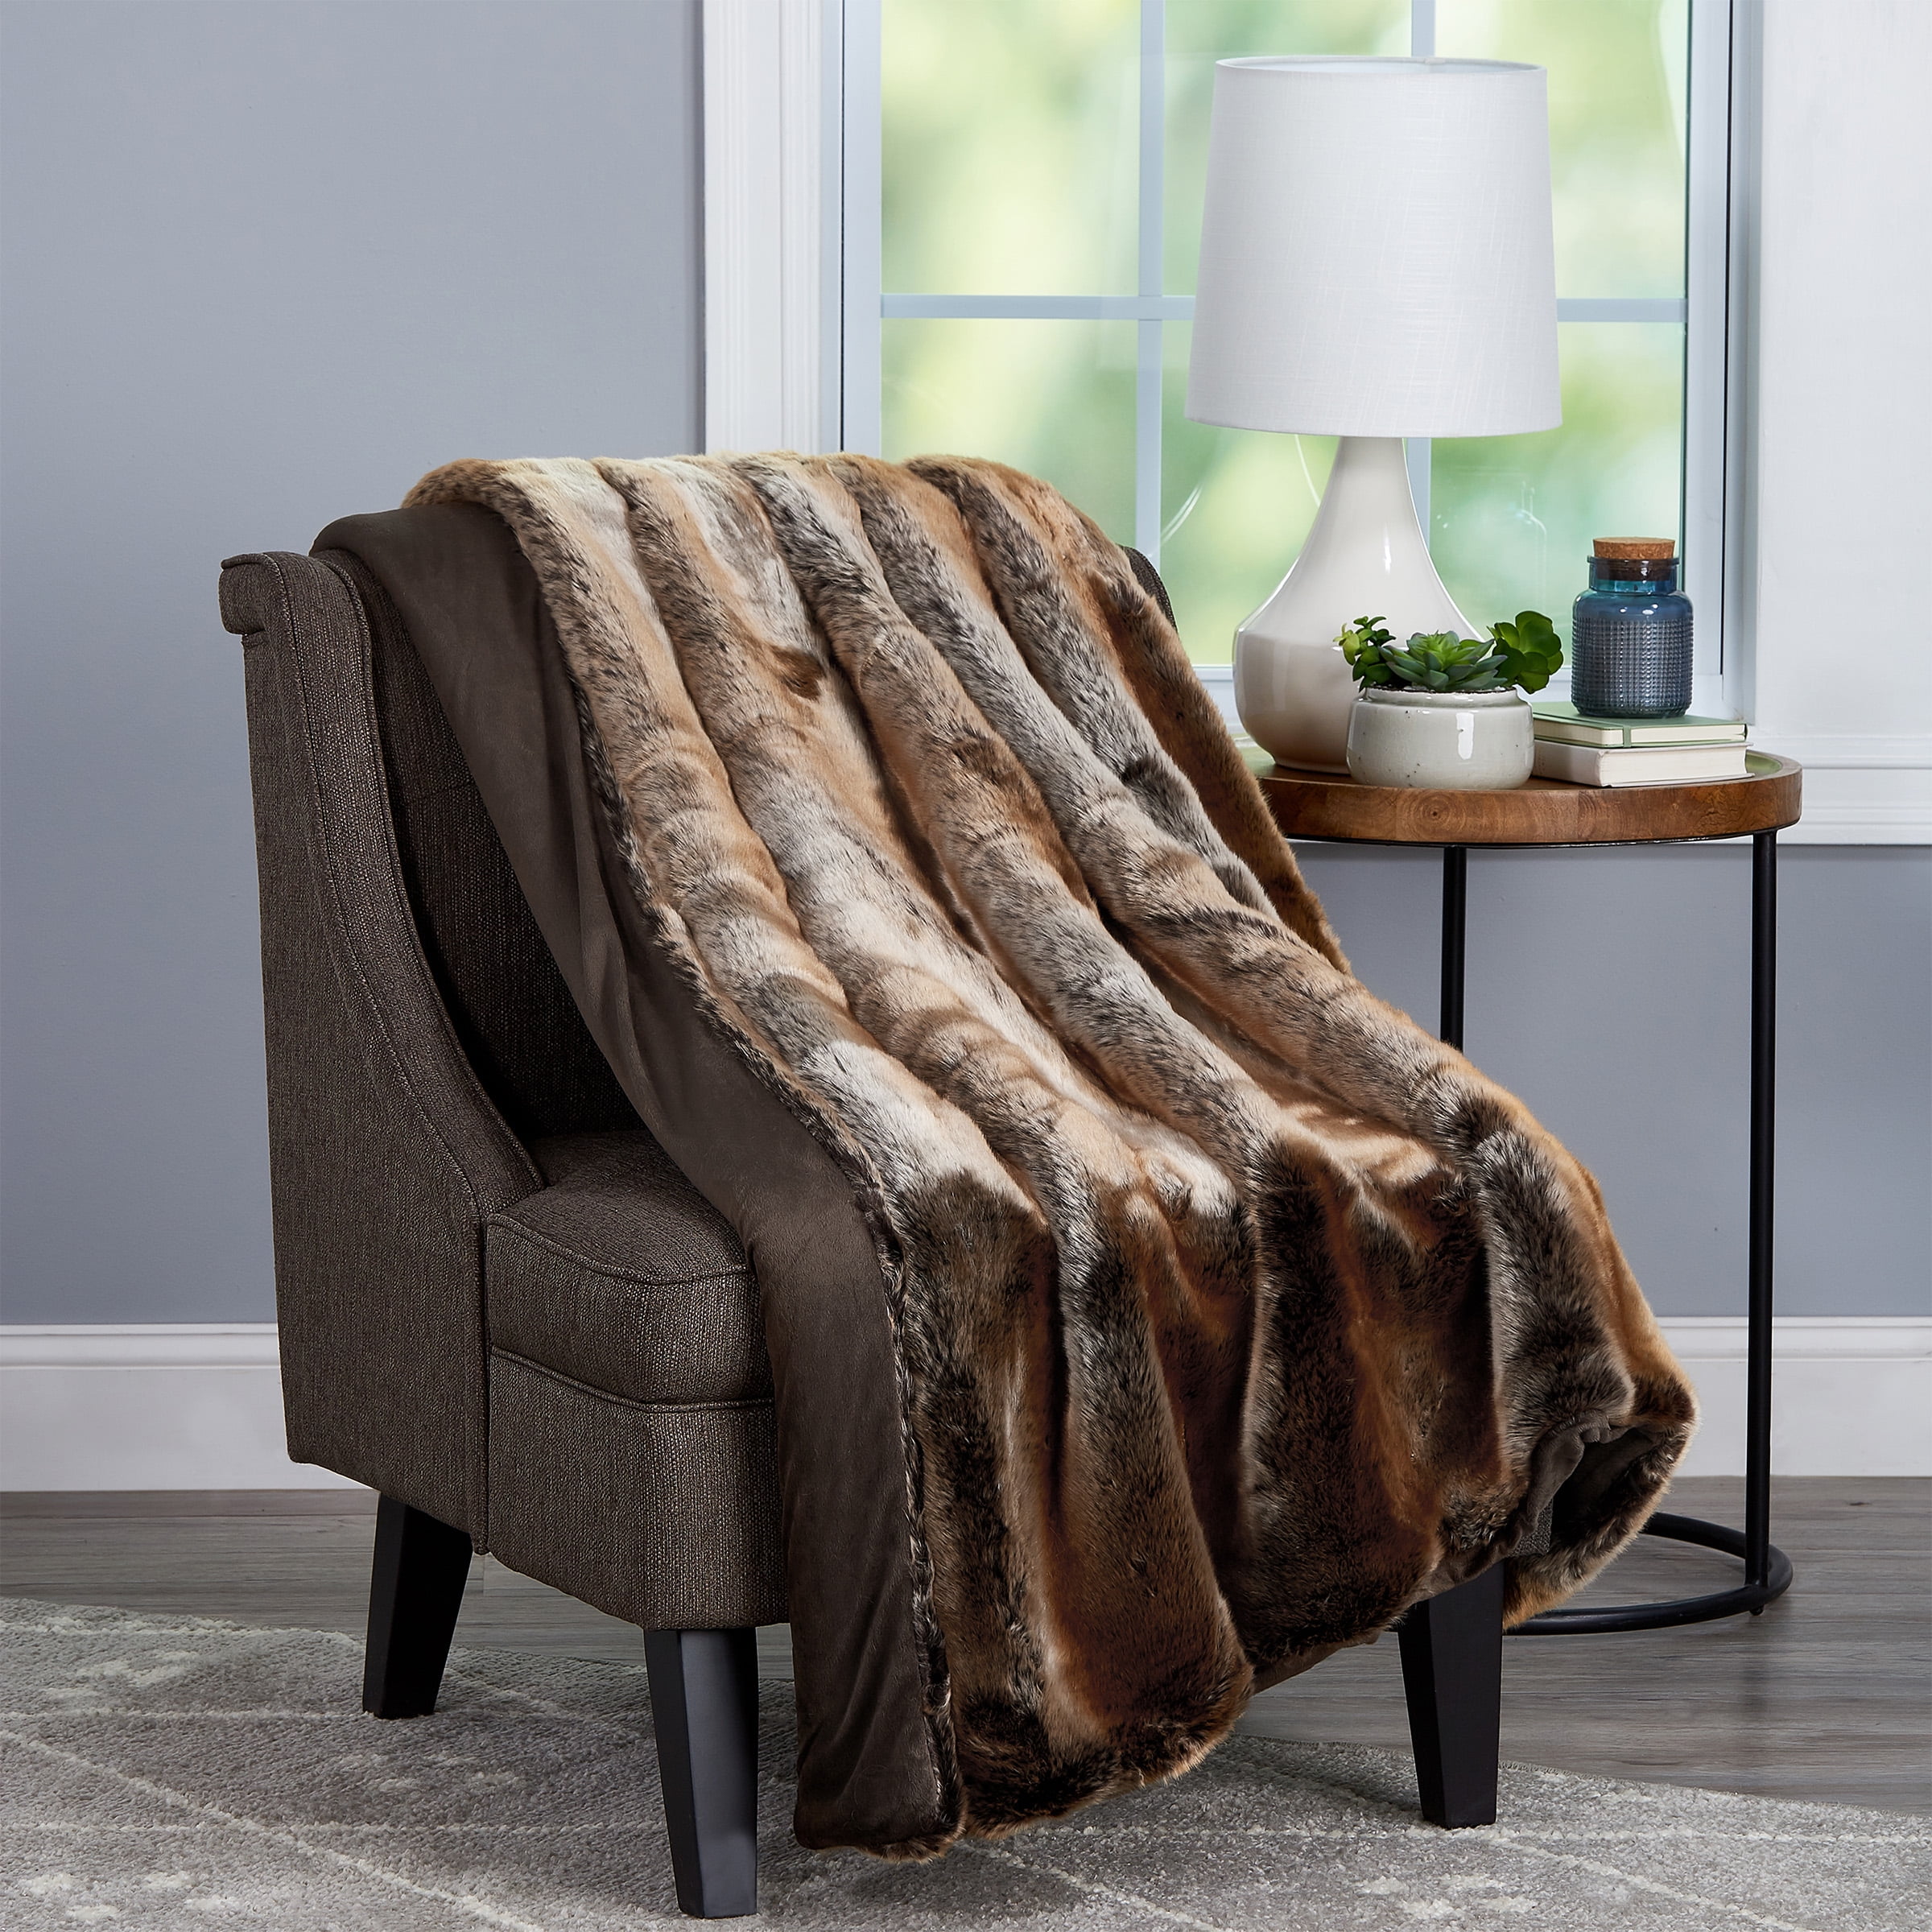 Somerset Home Luxurious Faux Fur Throw Blanket, Amber Brown, Oversized Throw